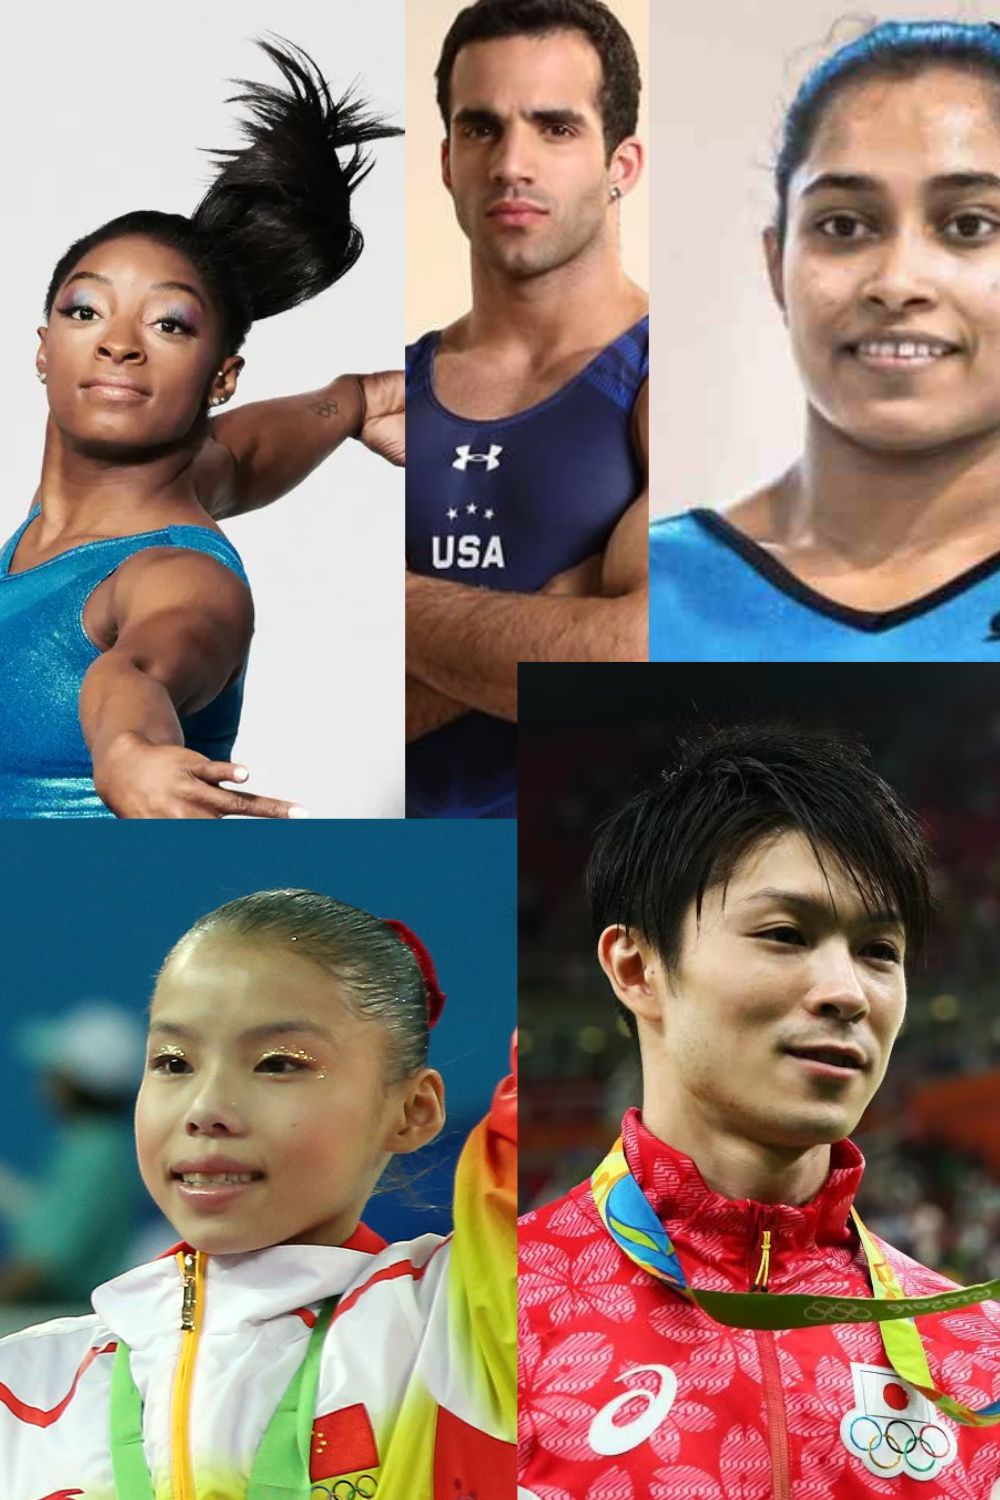 Top 12 Gymnasts In The World 